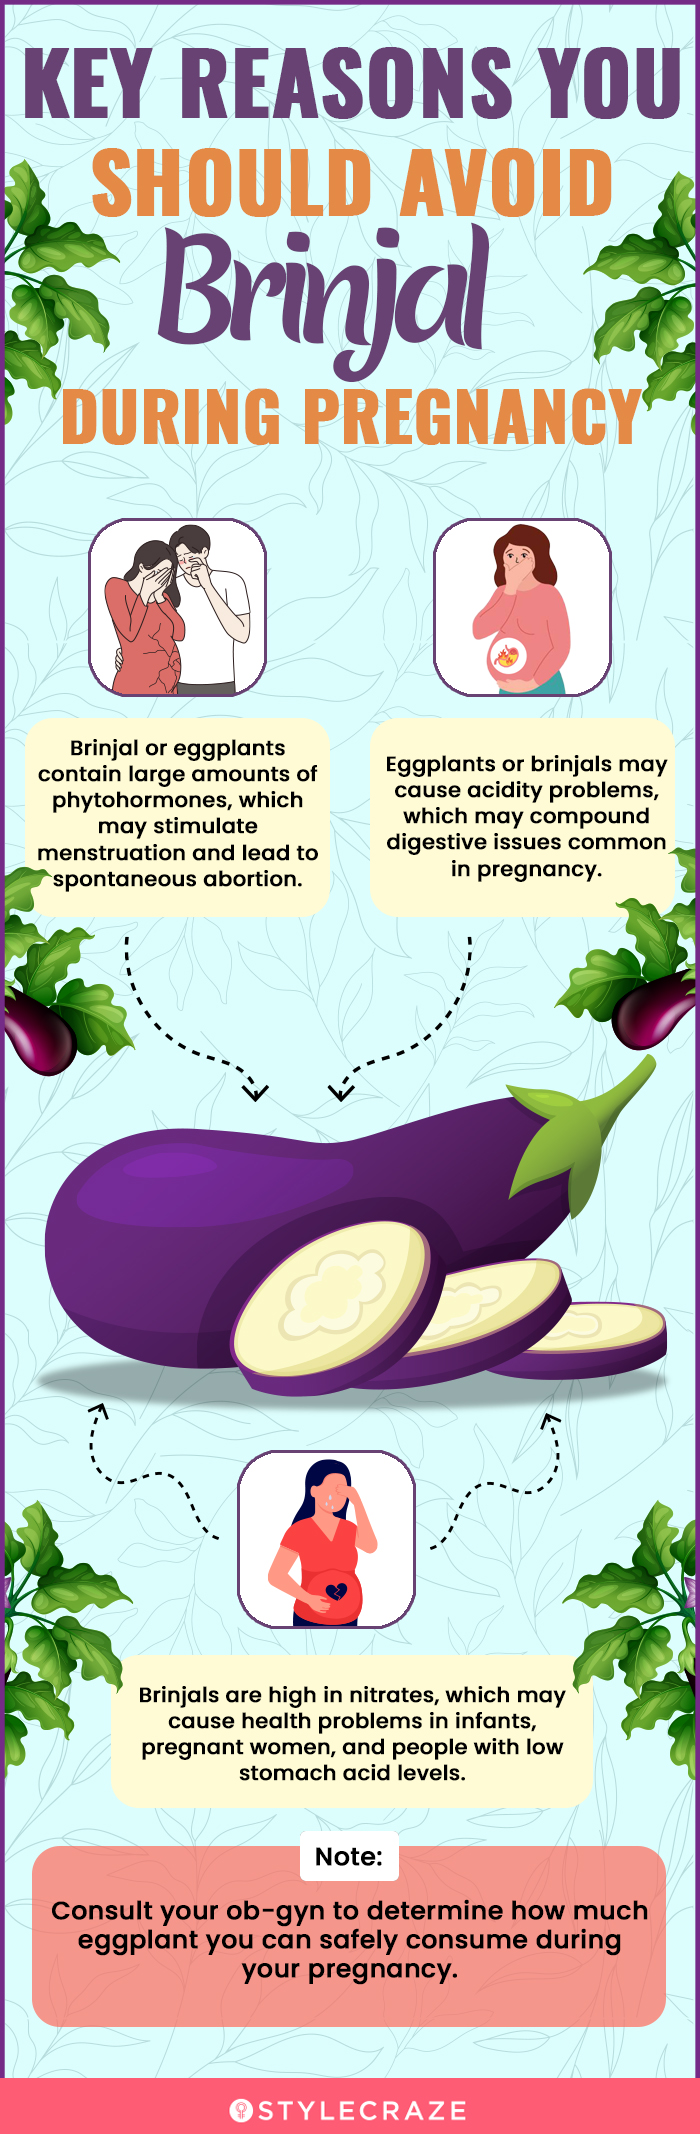 key reasons you should avoid brinjal during pregnancy (infographic)